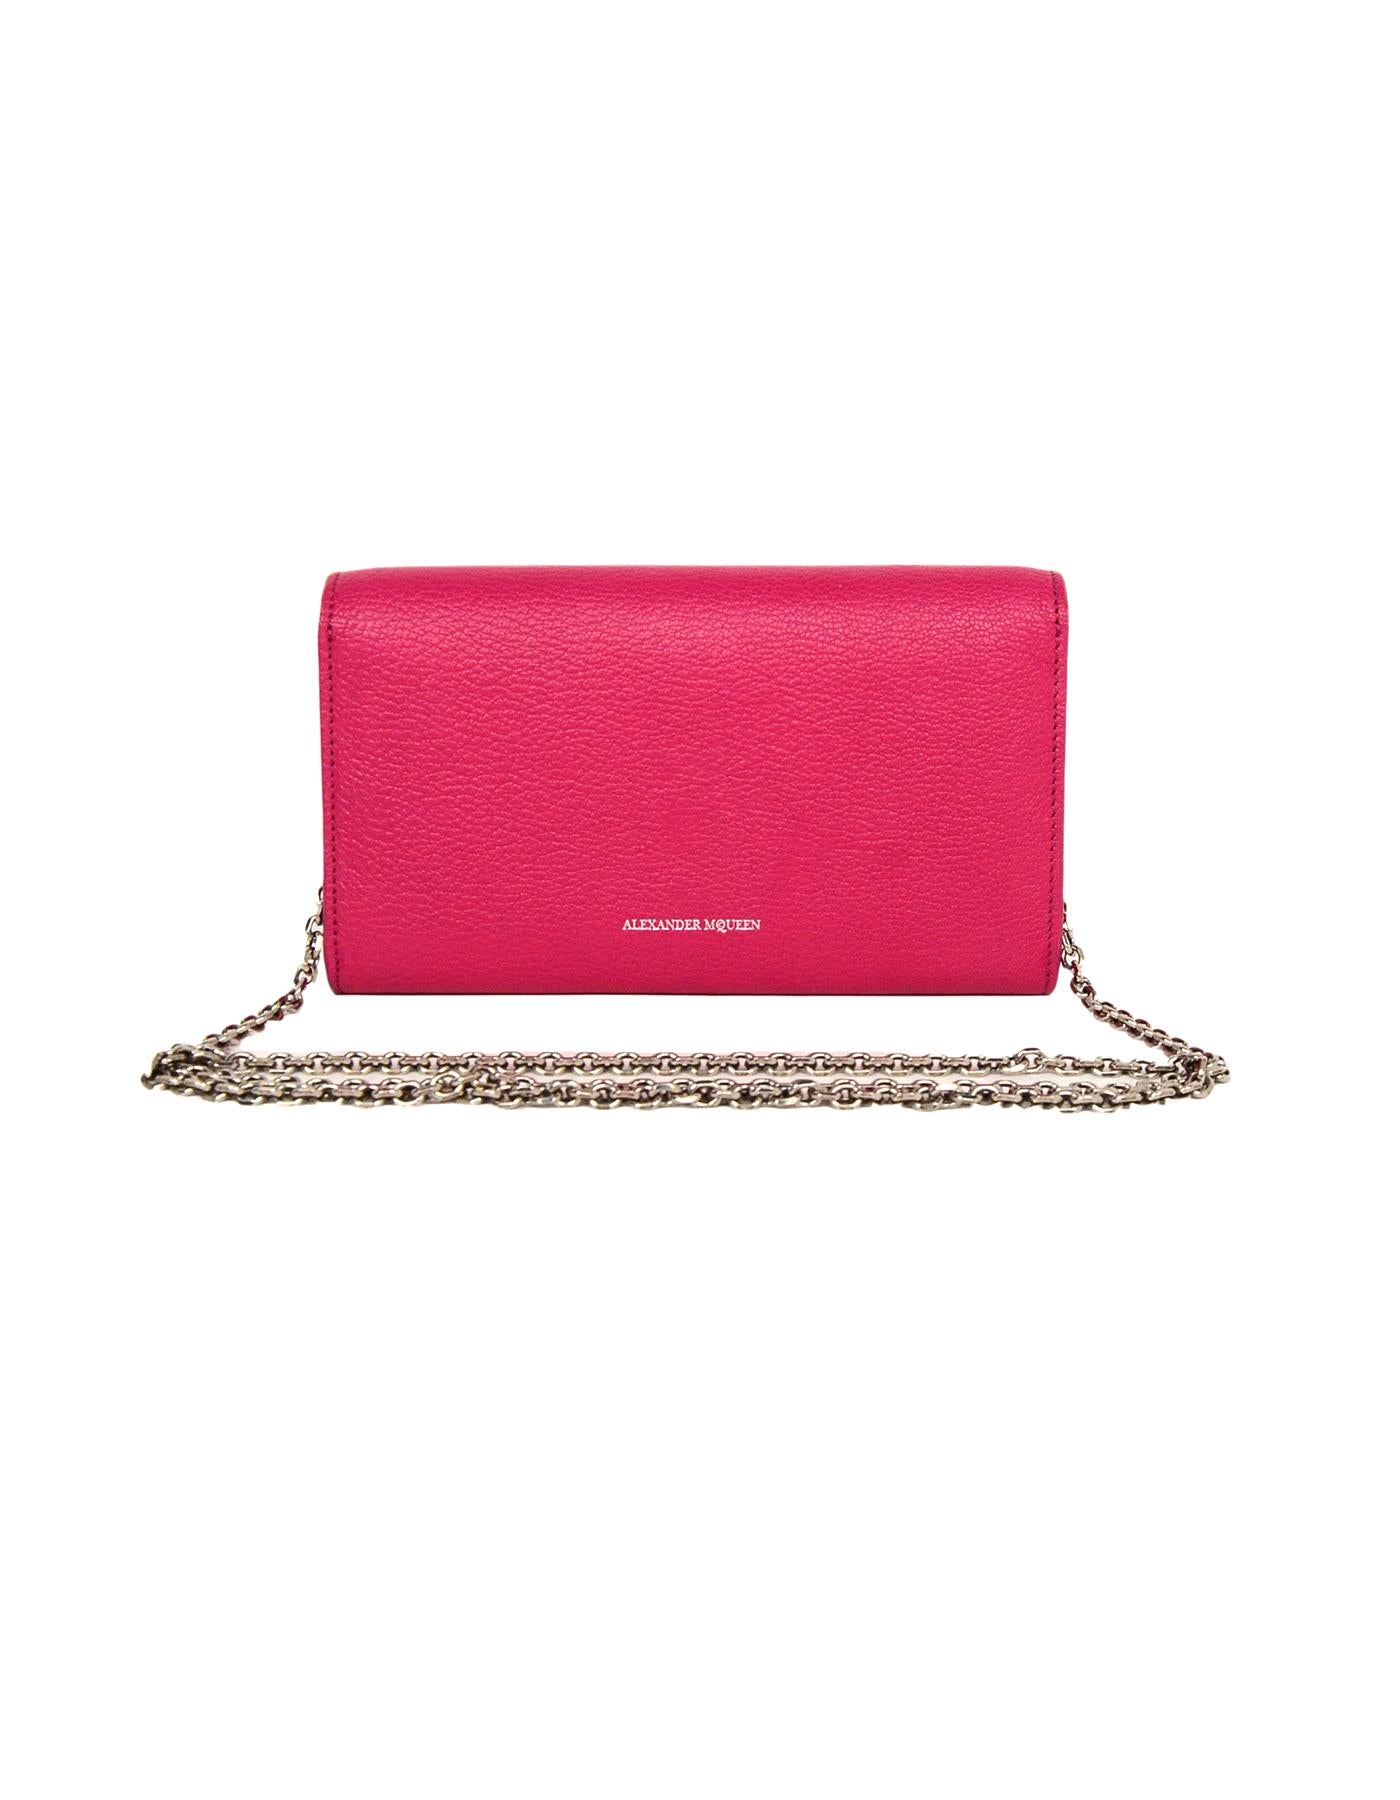 alexander mcqueen pebbled leather flap wallet-on-chain